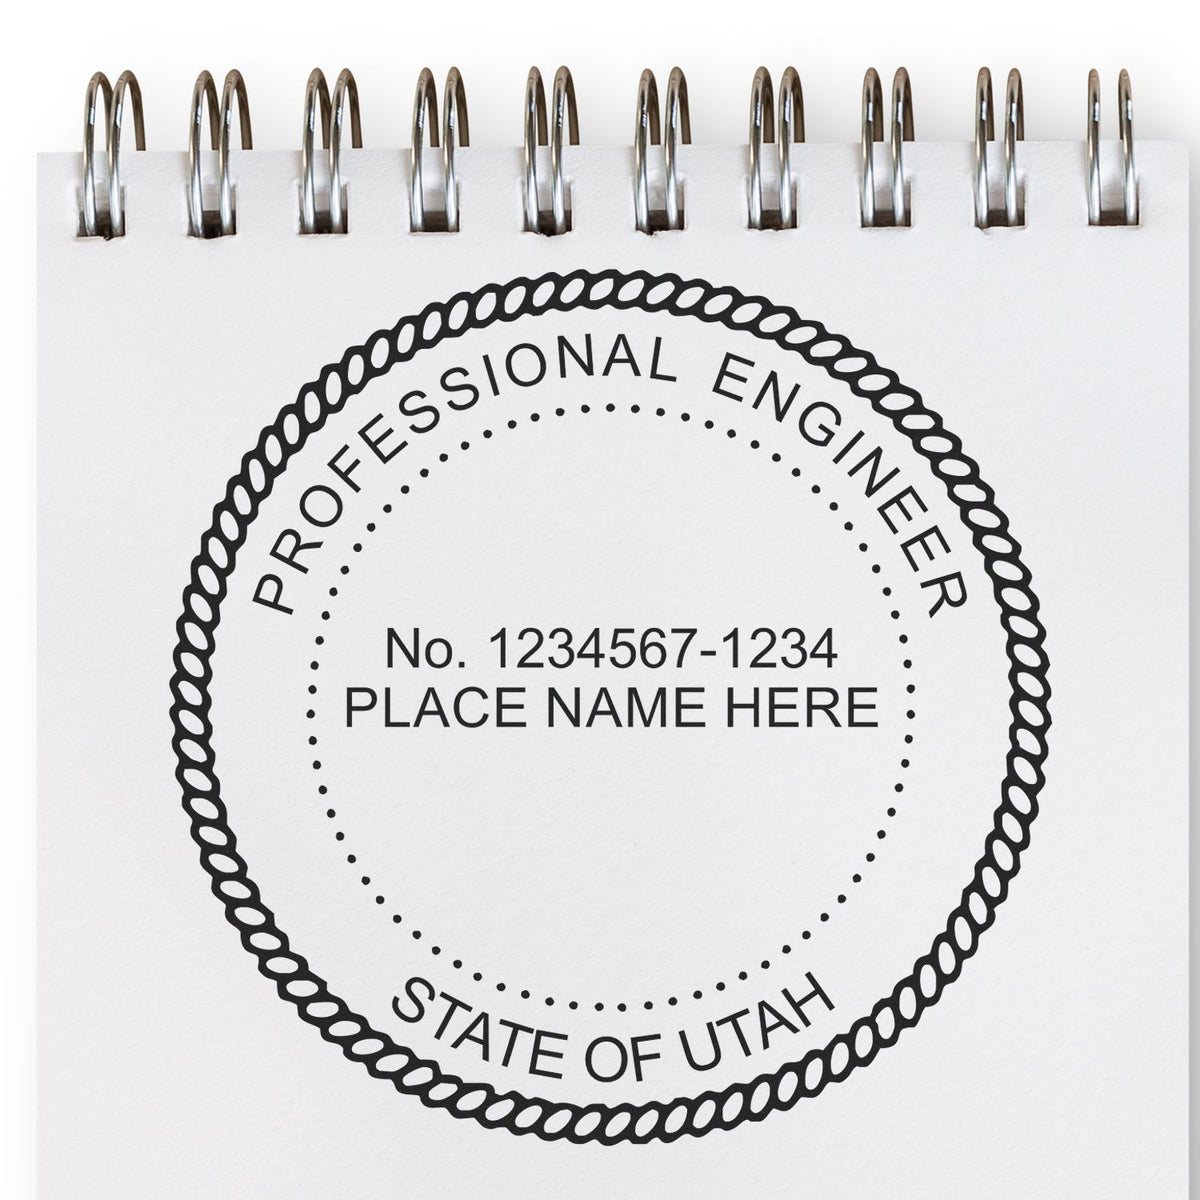 A lifestyle photo showing a stamped image of the Slim Pre-Inked Utah Professional Engineer Seal Stamp on a piece of paper